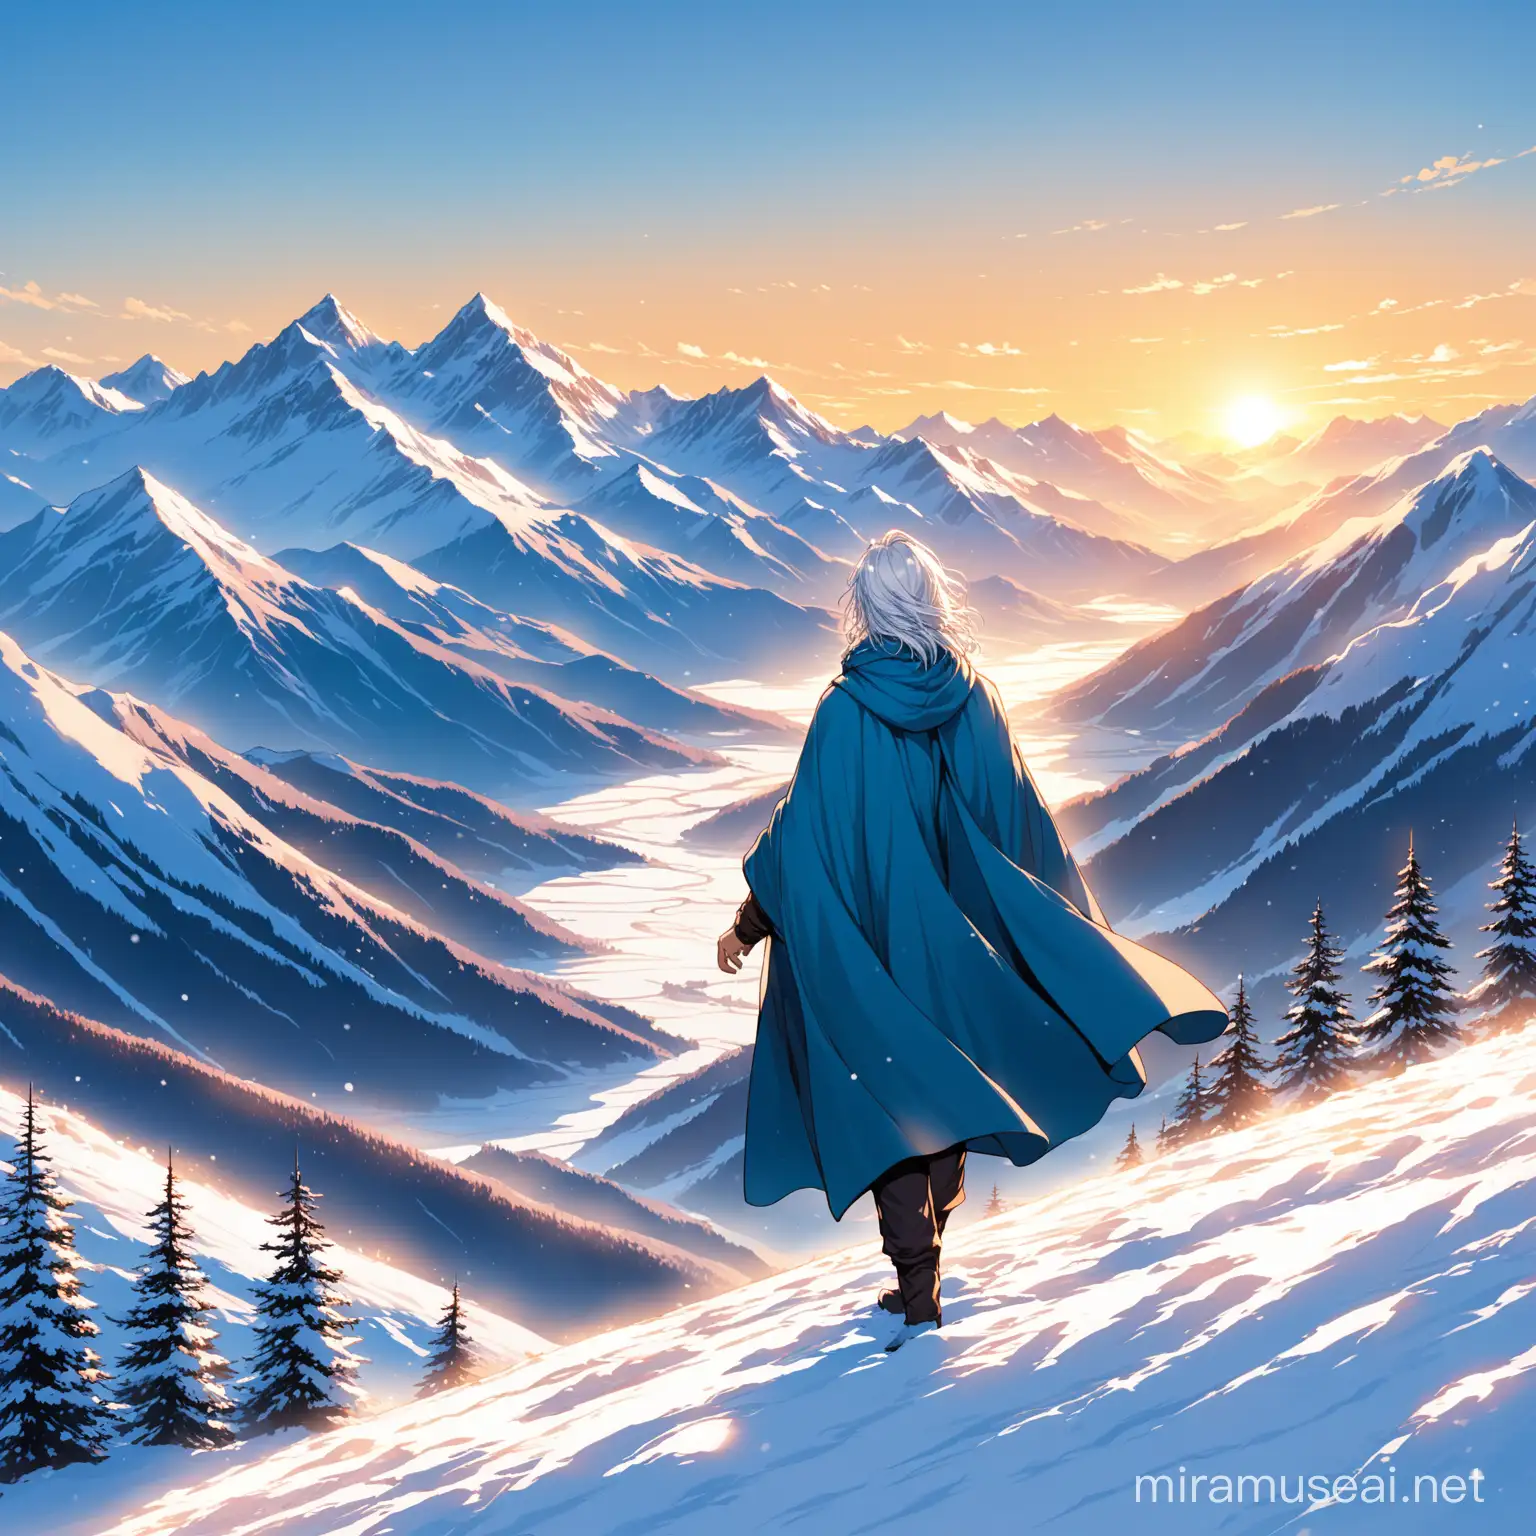 Magicians Winter Journey Young Man Amidst SnowCovered Mountains at Sunrise